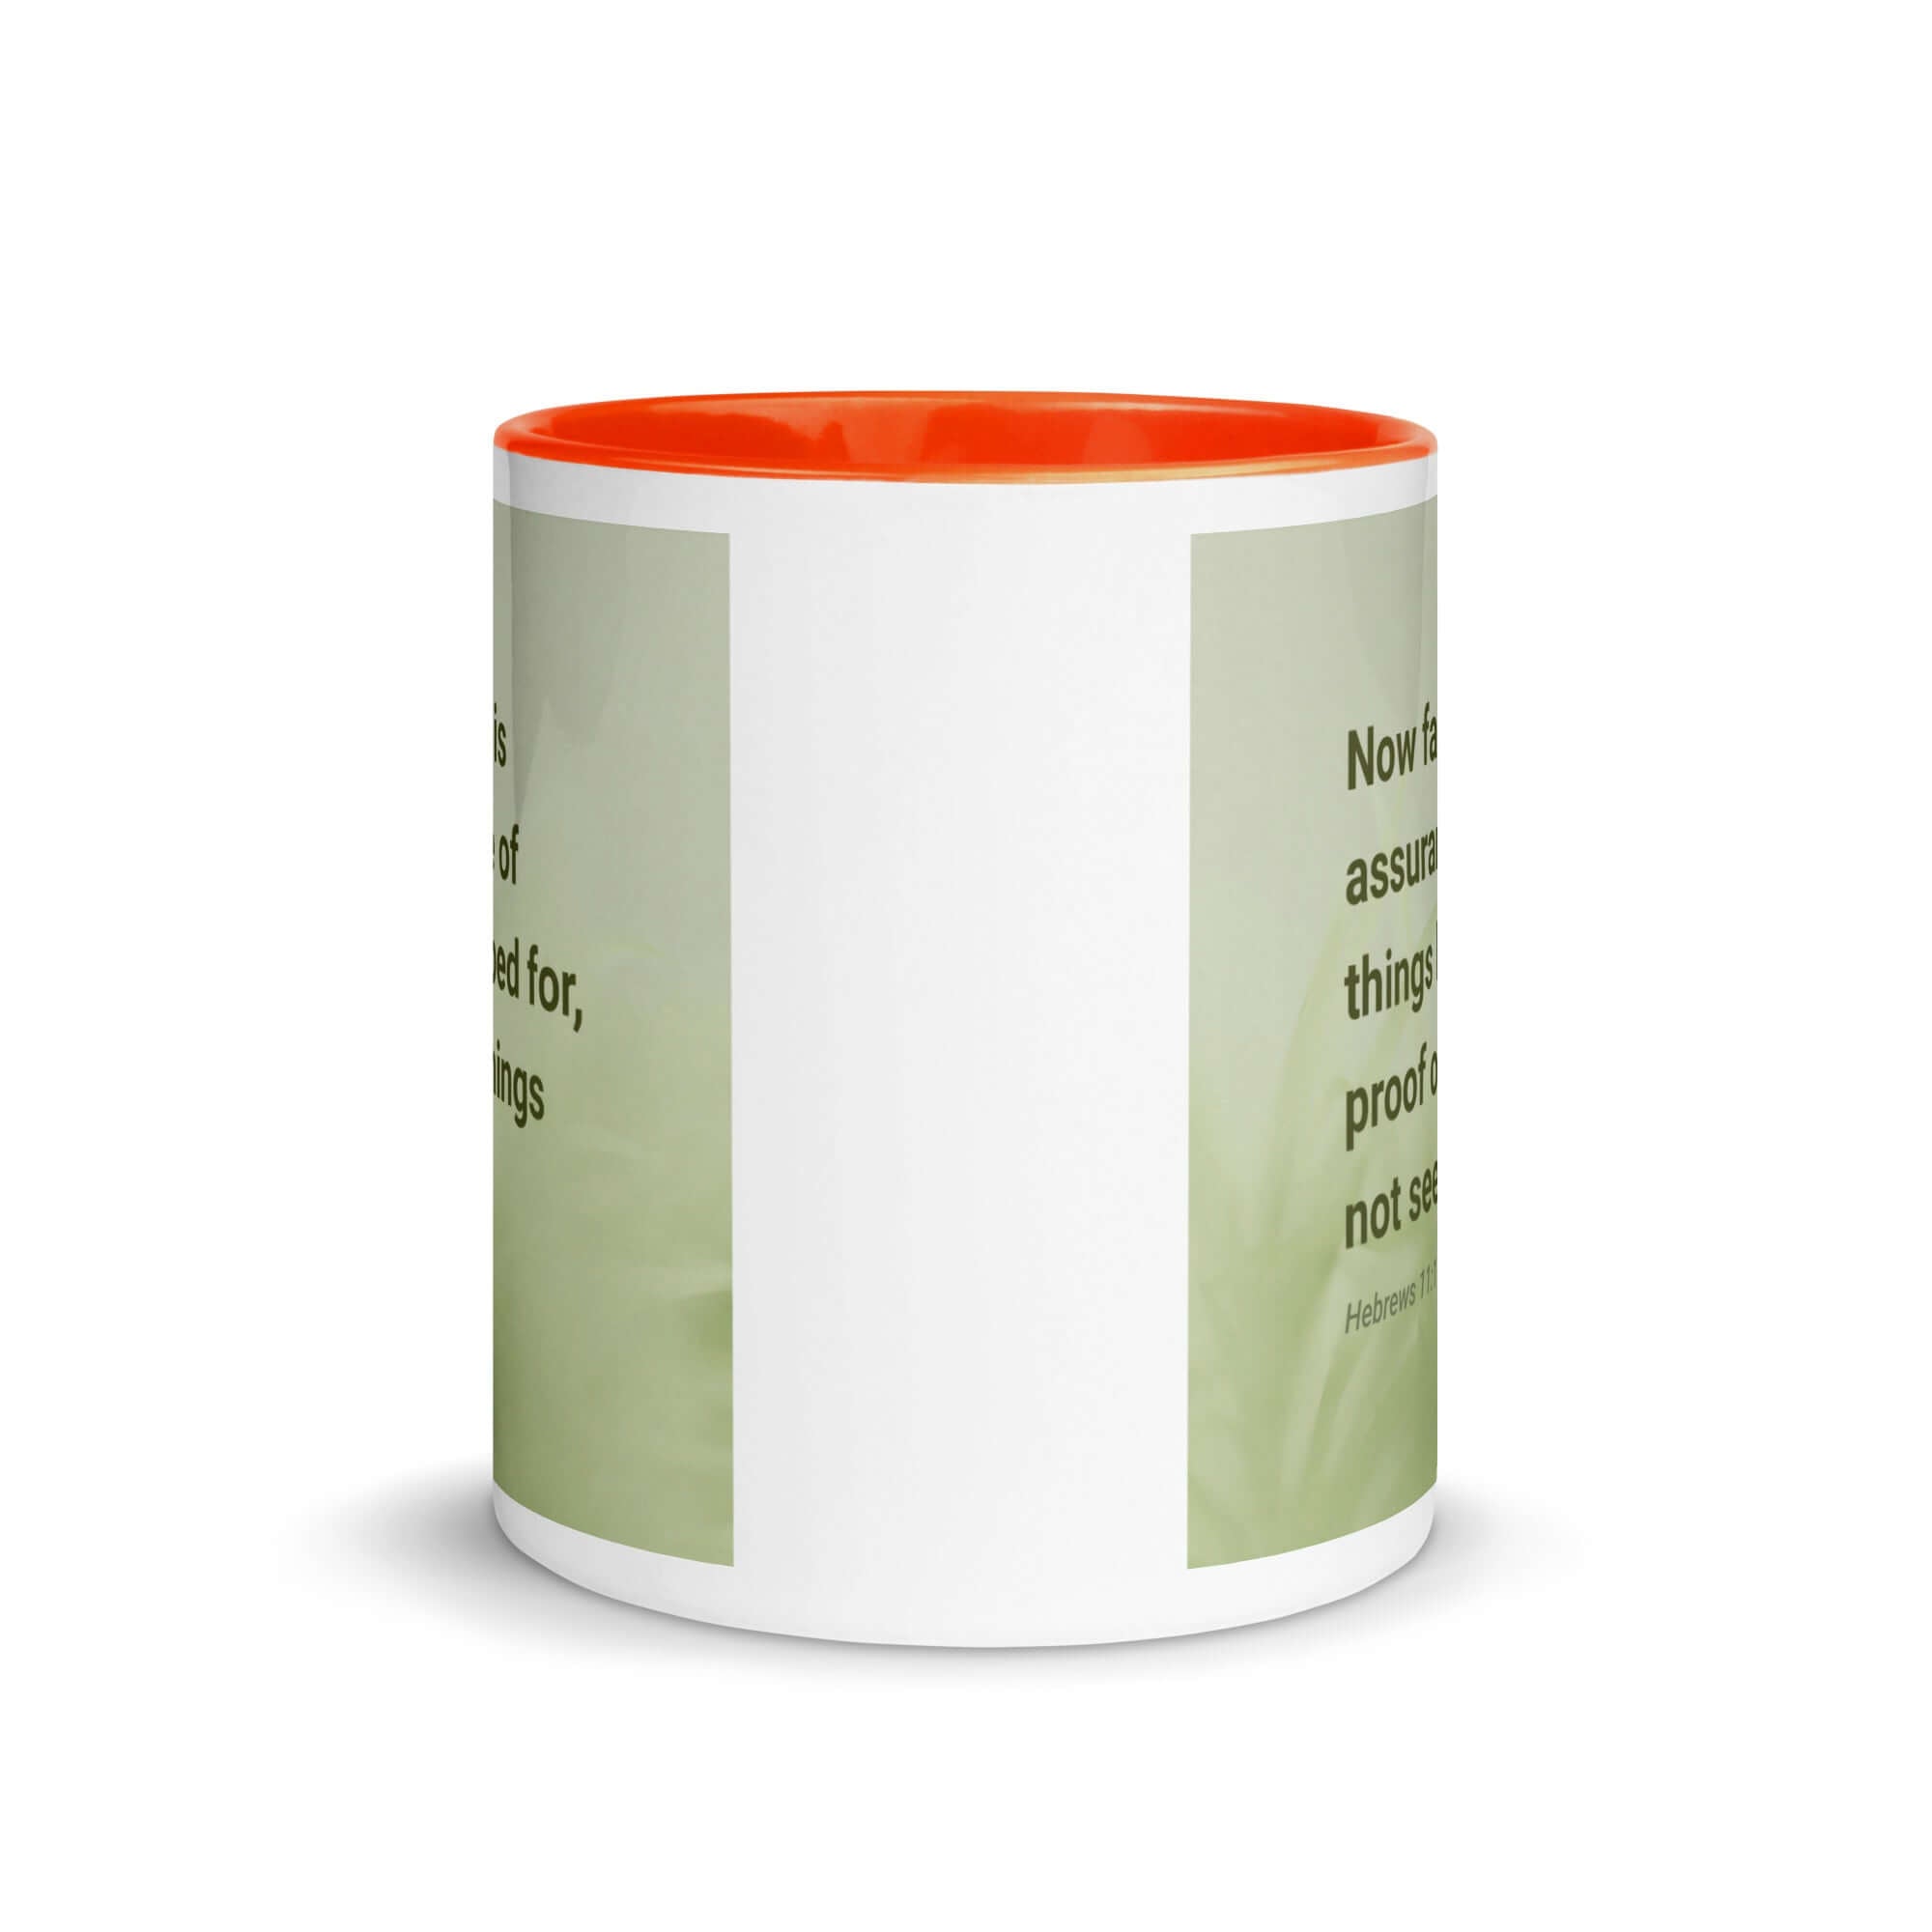 Heb 11:1 - Bible Verse, faith is assurance White Ceramic Mug with Color Inside